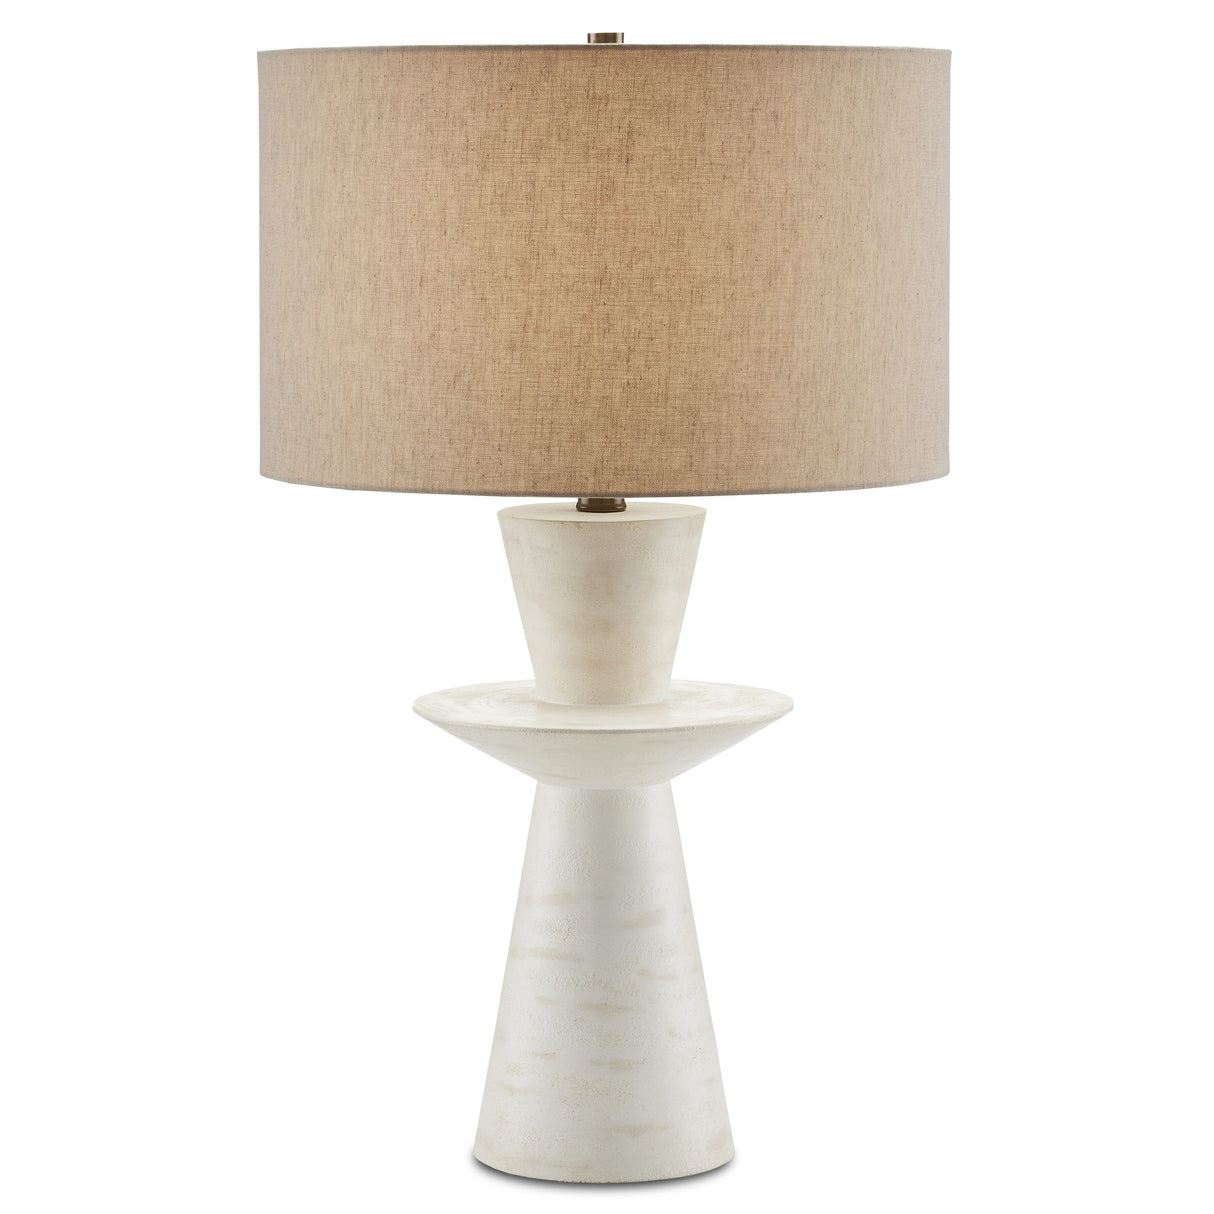 Currey and Company Cantata Table Lamp Lighting currey-co-6000-0804